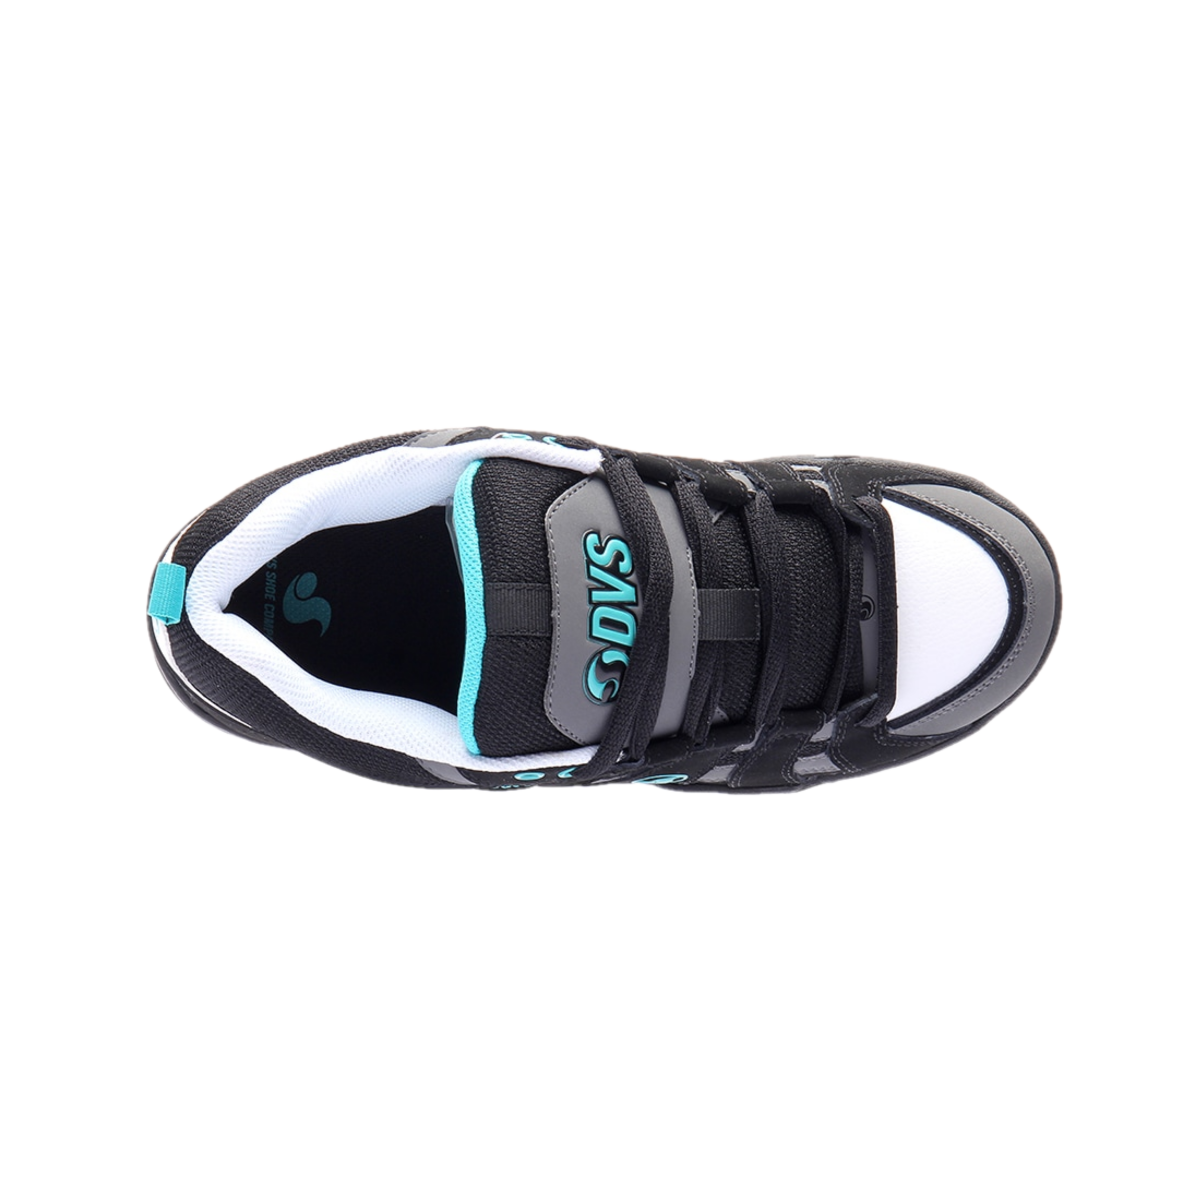 DVS F0000335001 PRIMO MN'S (Medium) Black/Charcoal/Turquoise Leather, Suede & Nubuck Skate Shoes